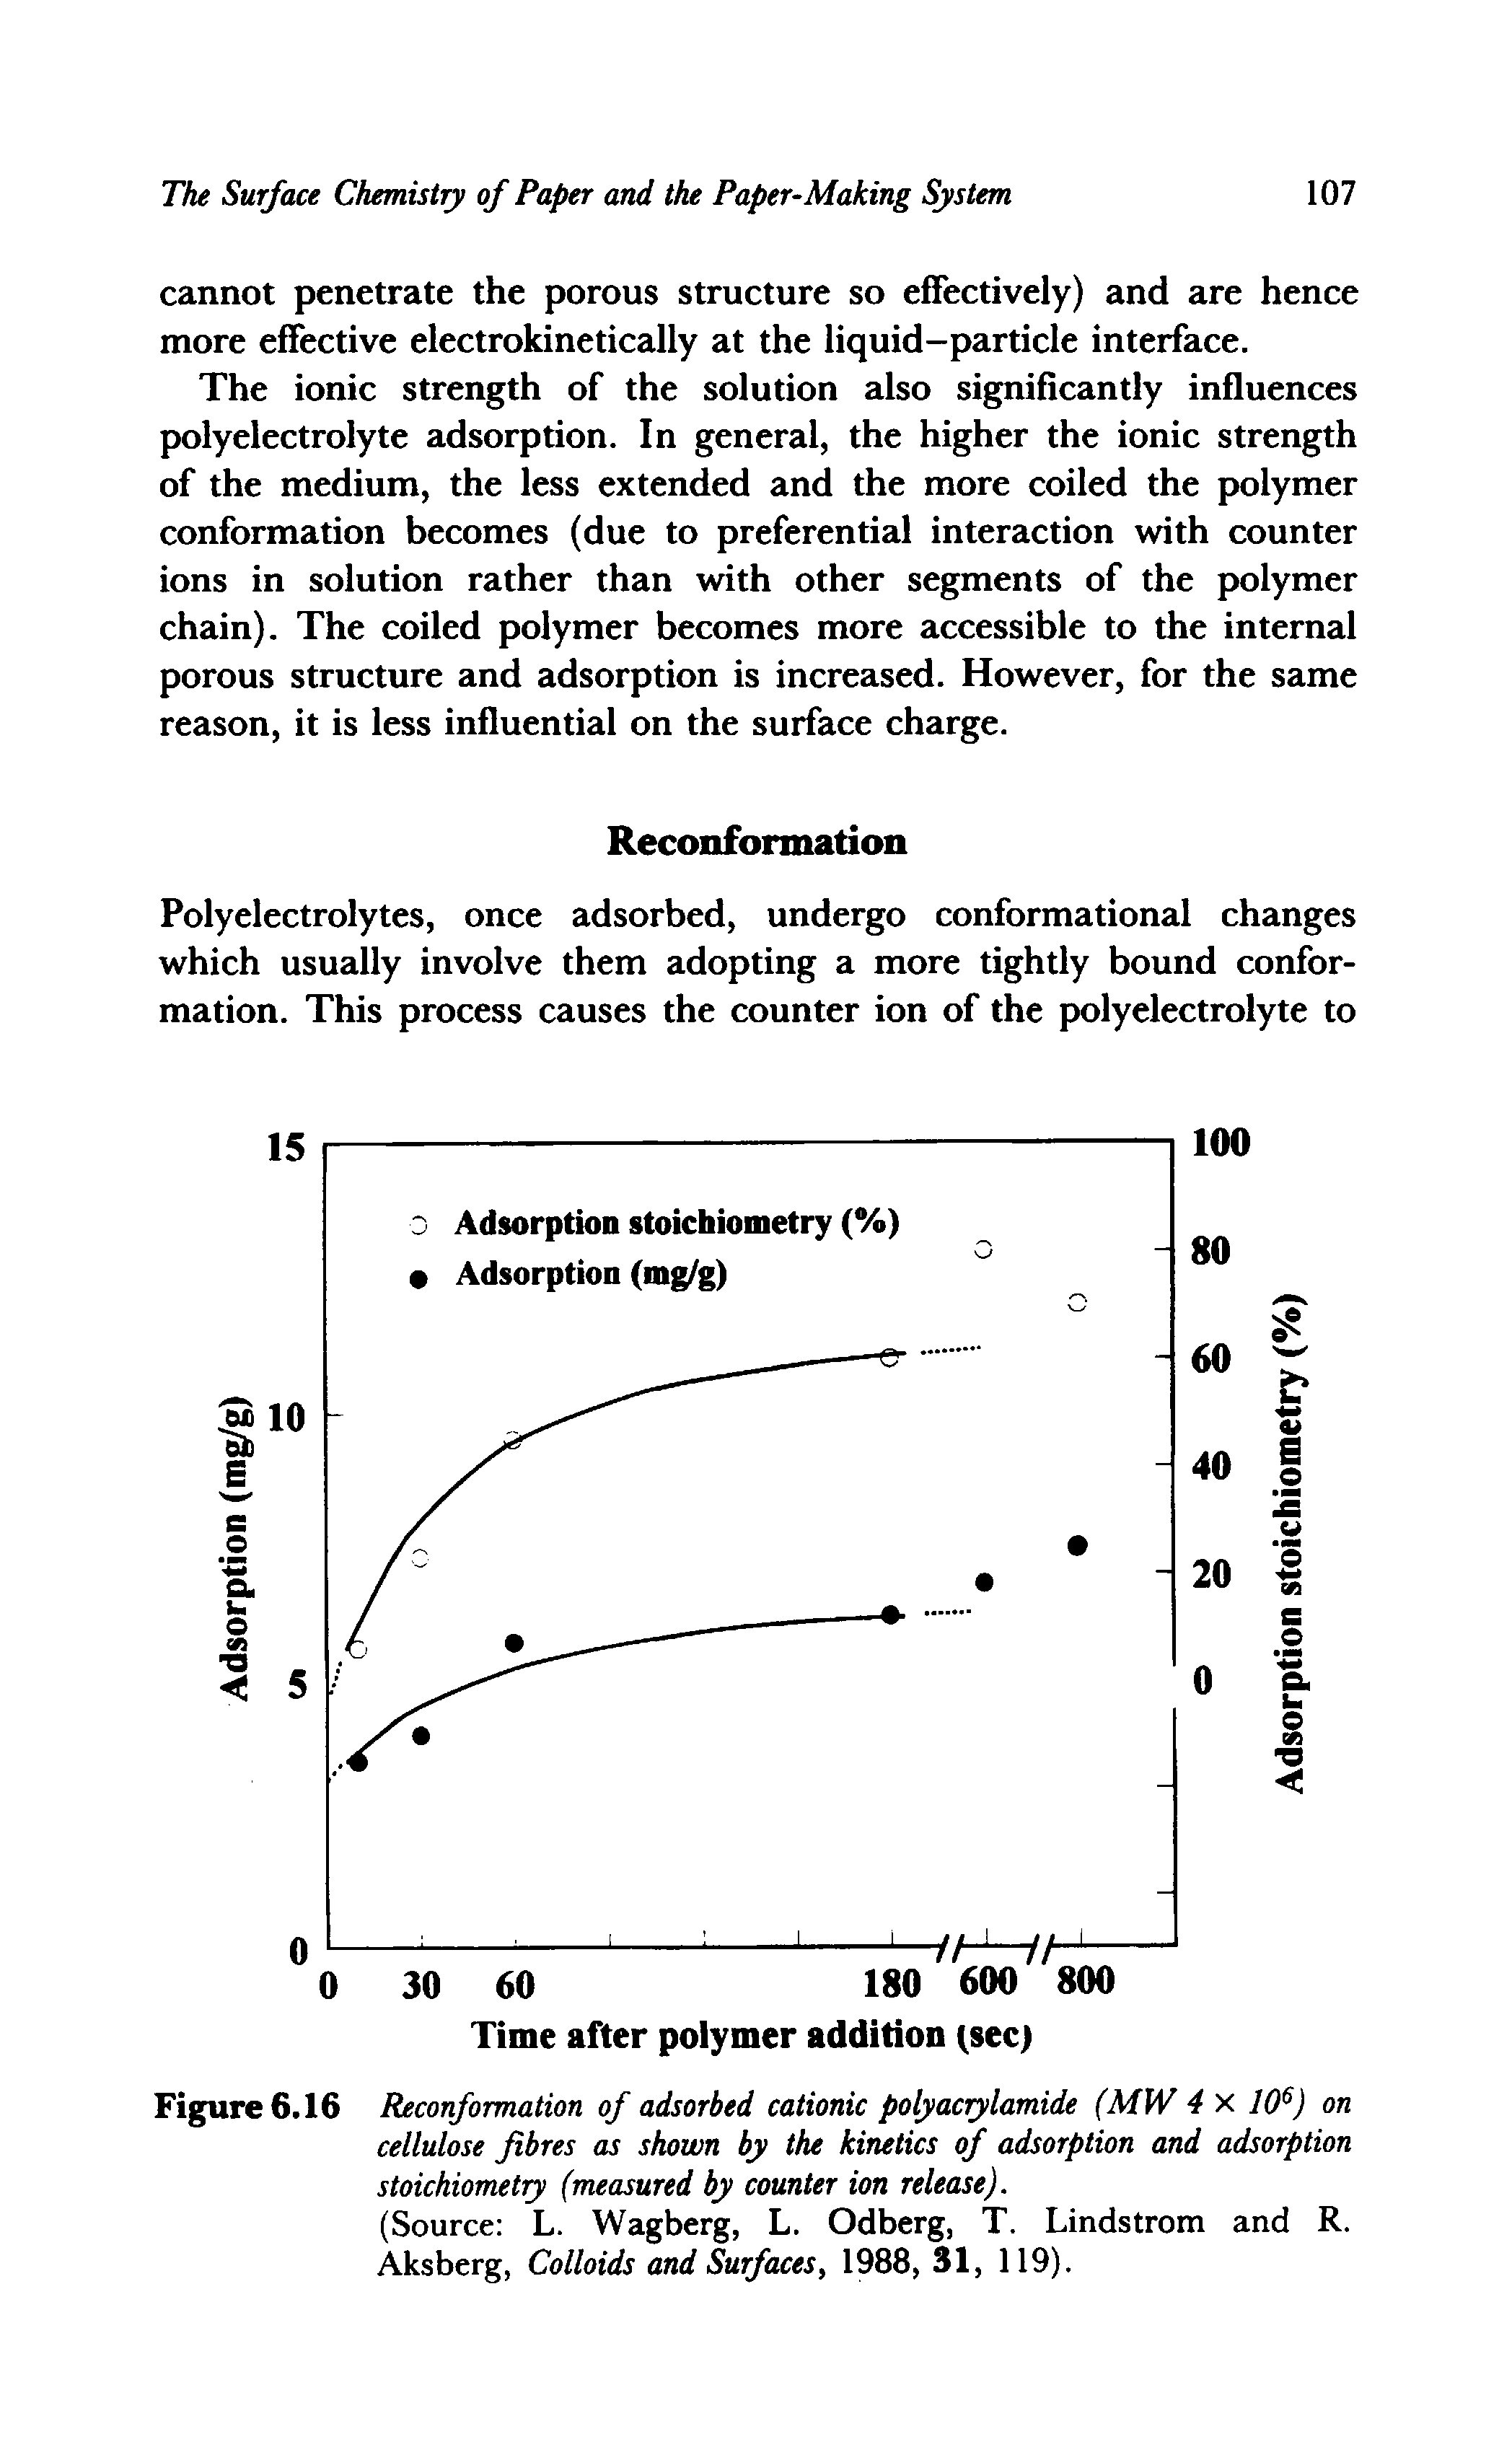 Figure 6.16 Reconformation of adsorbed cationic polyacrylamide (MW 4 x 106) on cellulose fibres as shown by the kinetics of adsorption and adsorption stoichiometry (measured by counter ion release).